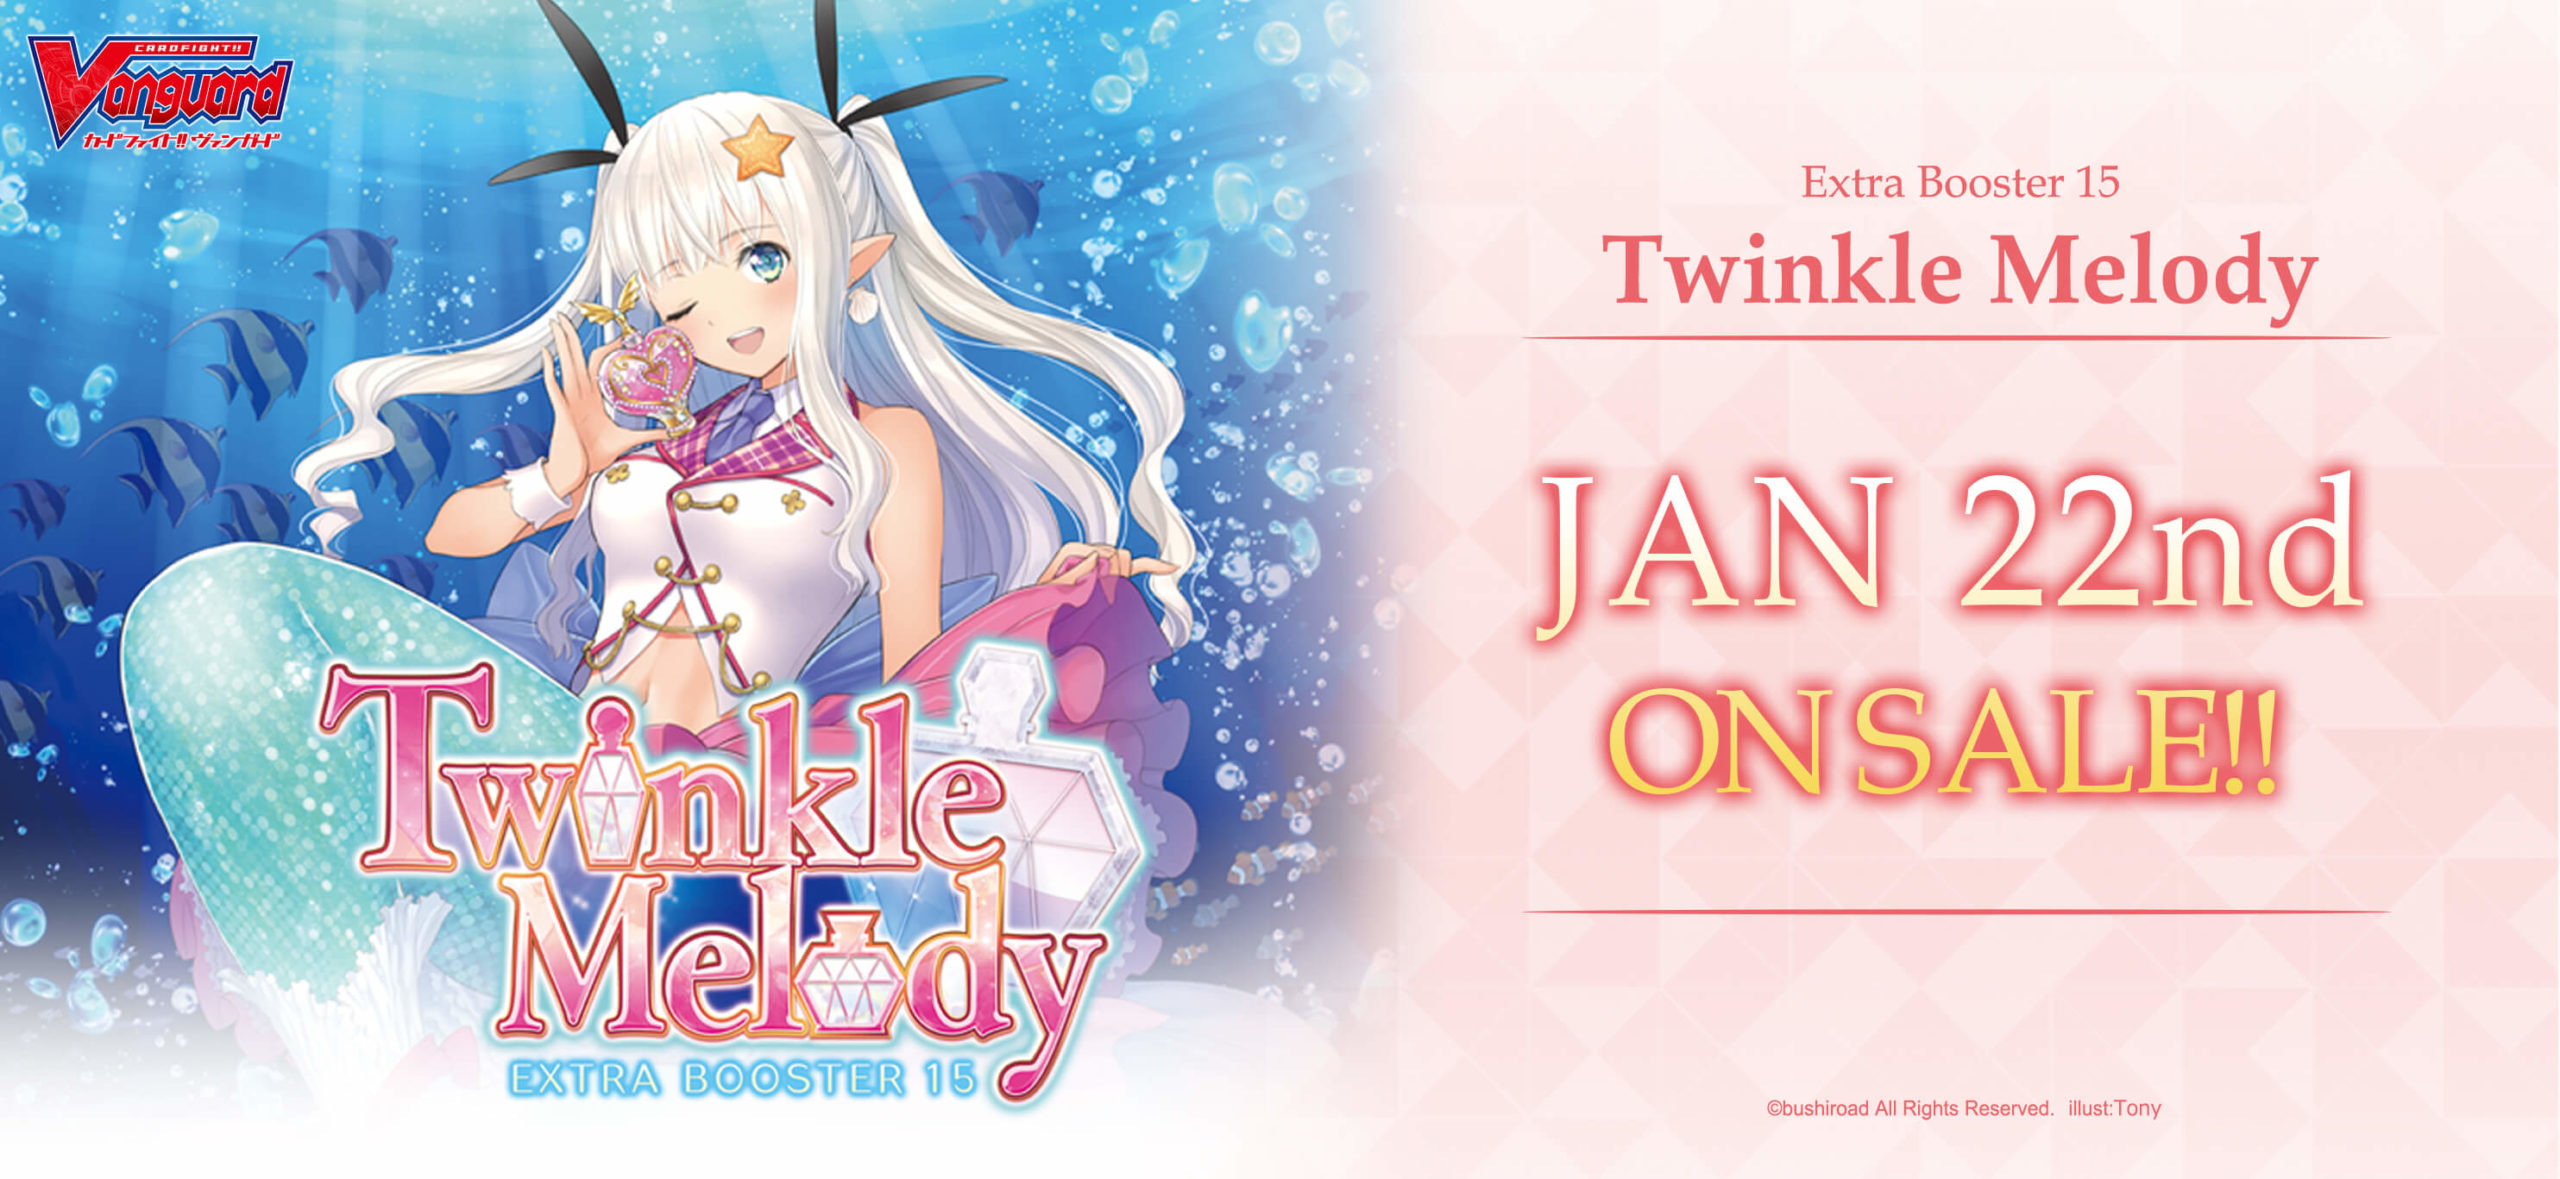 V Extra Booster 15: Twinkle Melody